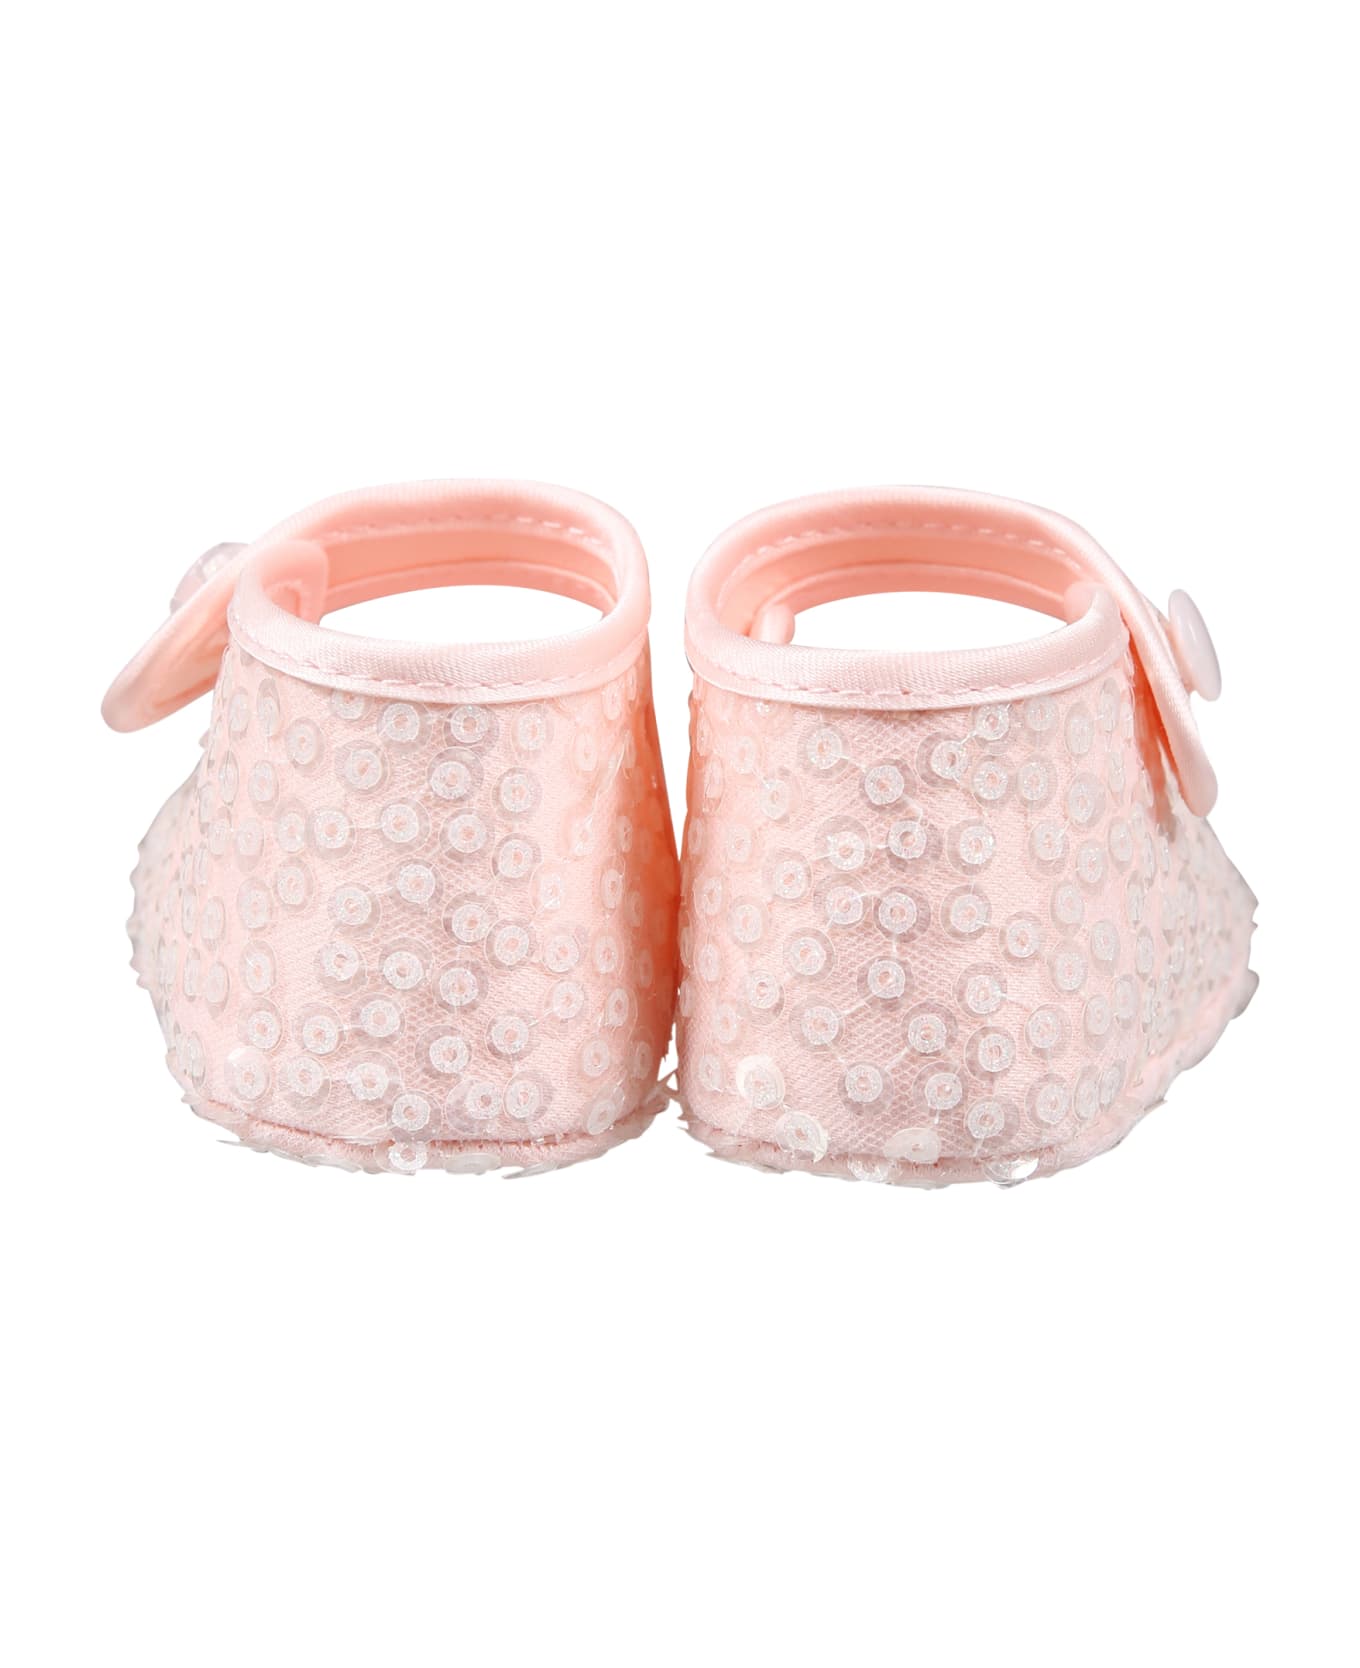 Monnalisa Pink Flat Shoes For Baby Girl With Sequins - Pink